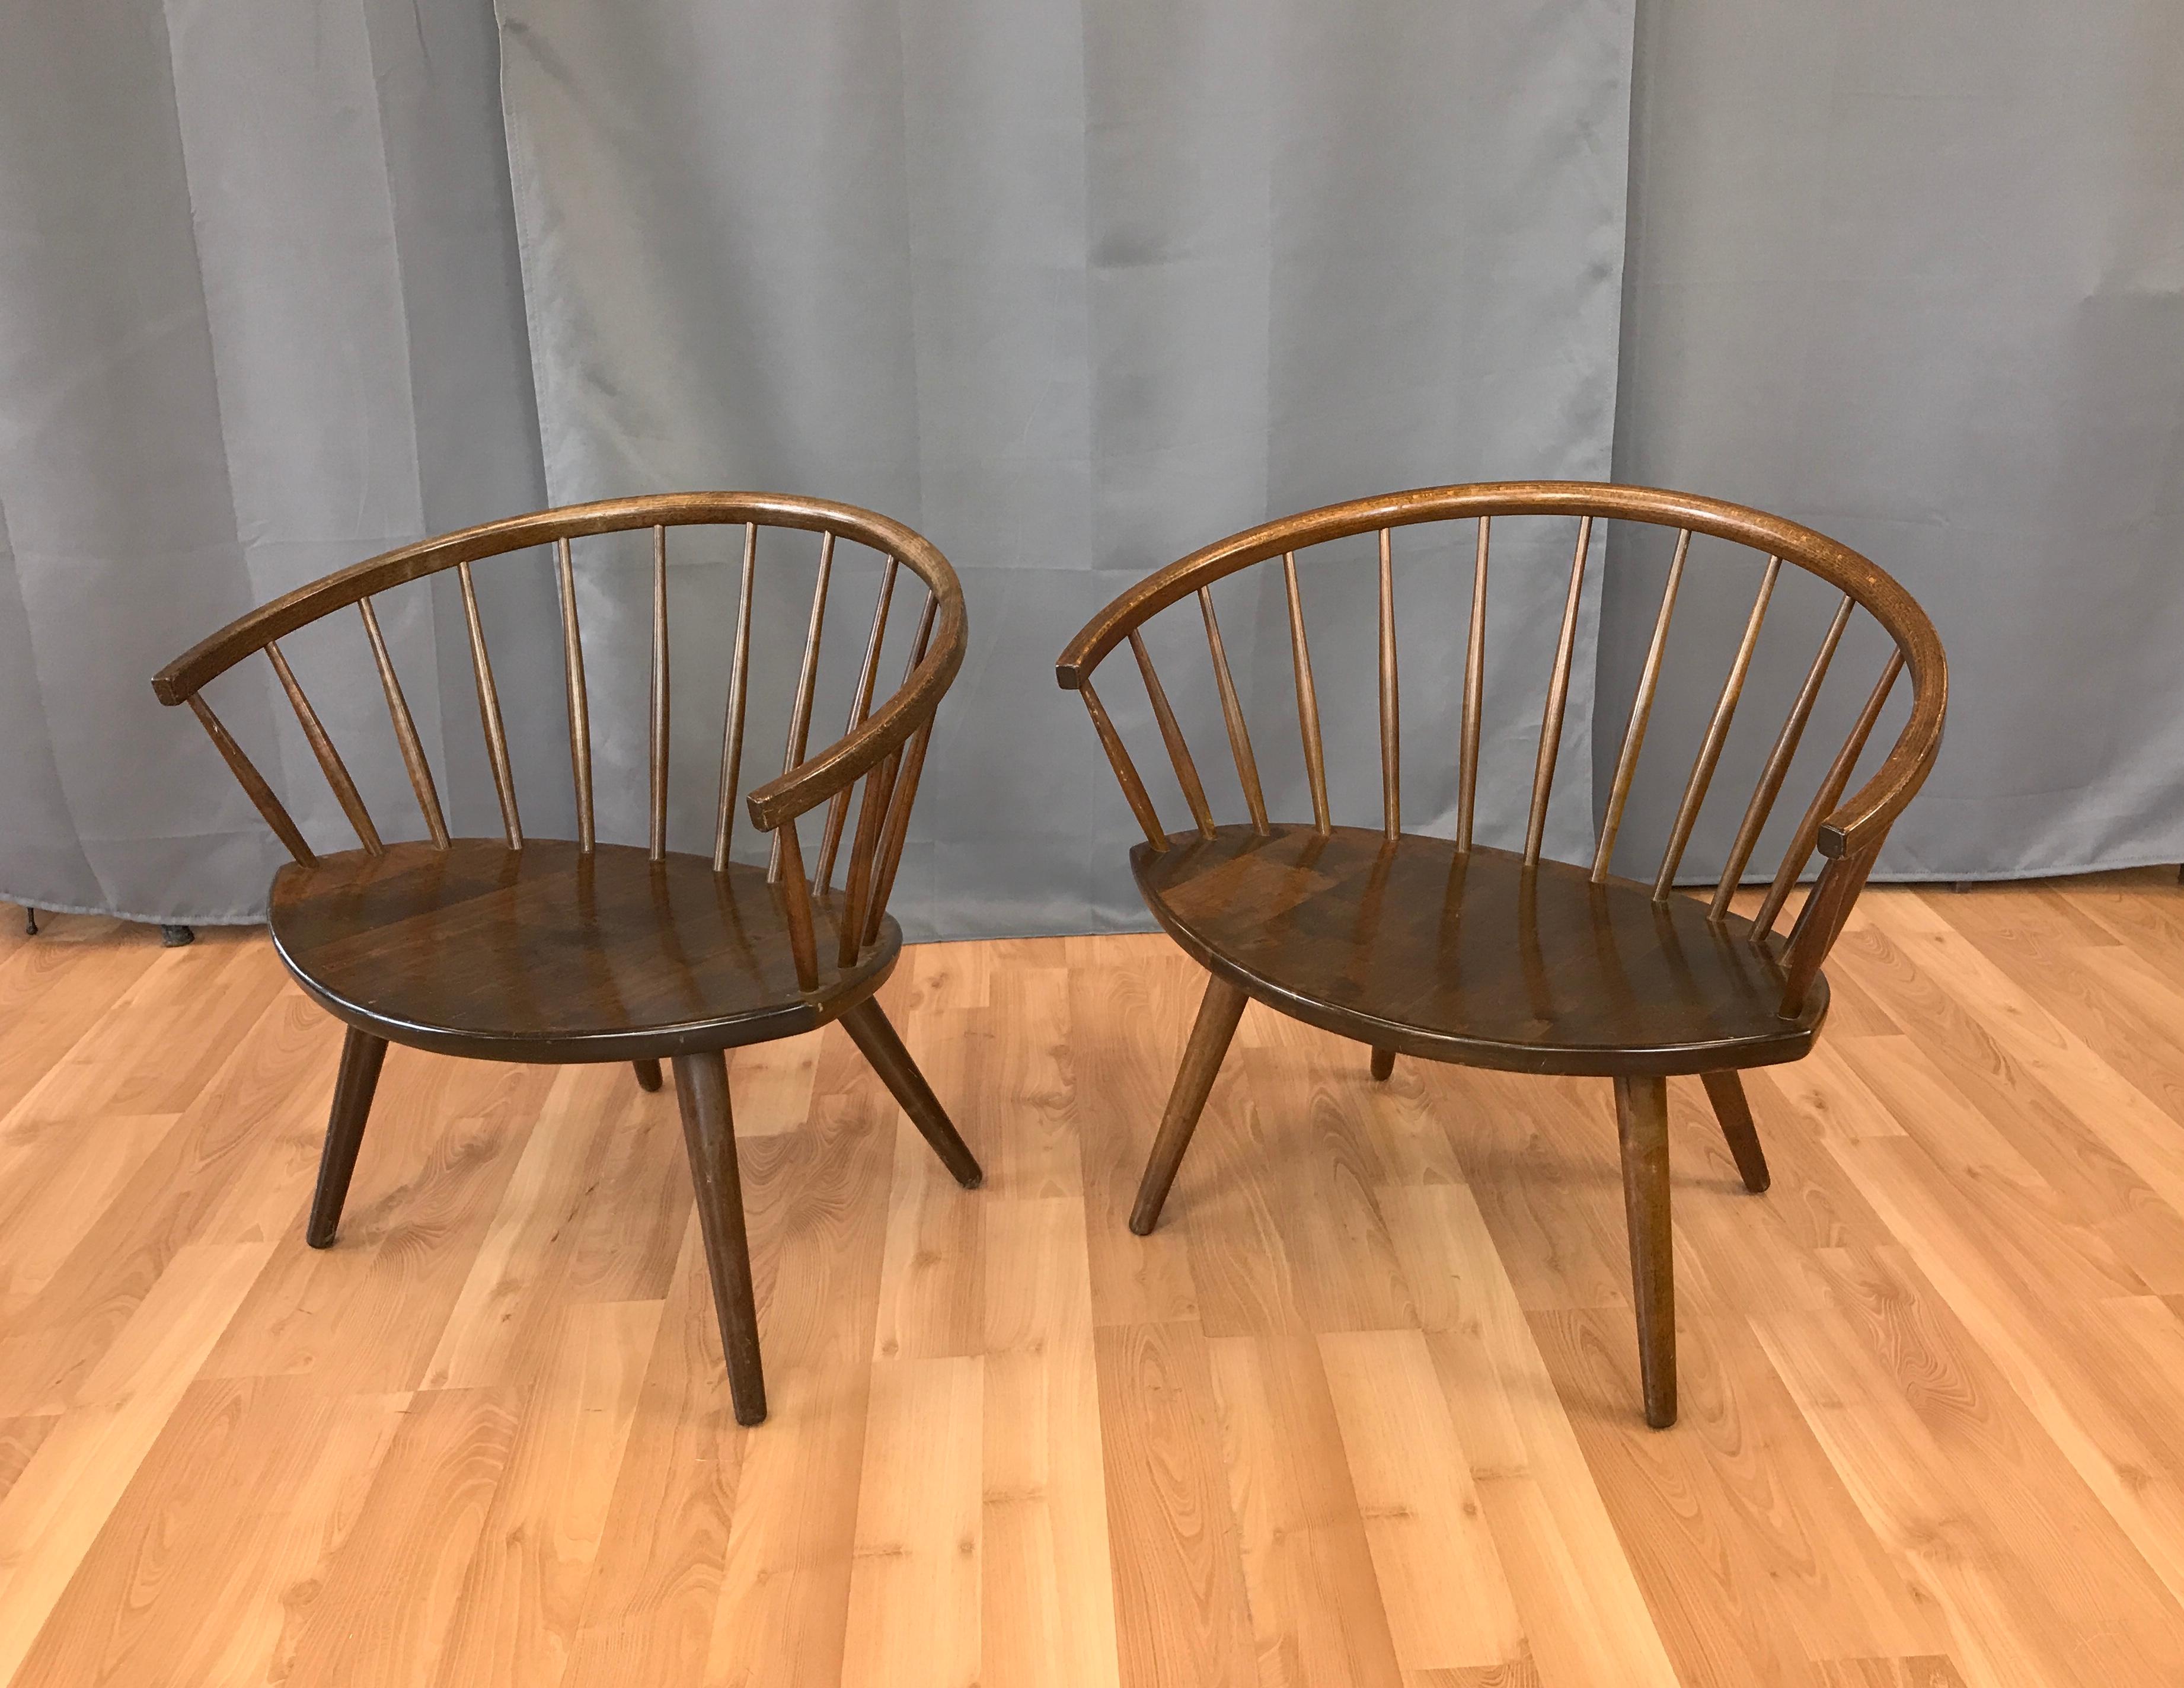 A pair of oak “Arka” low captain’s chairs designed by Yngve Ekström and produced by Stolab. 

A sought-after Scandinavian design Classic that skilfully plays with the proportions of a traditional captain’s chair. Very well crafted of solid oak